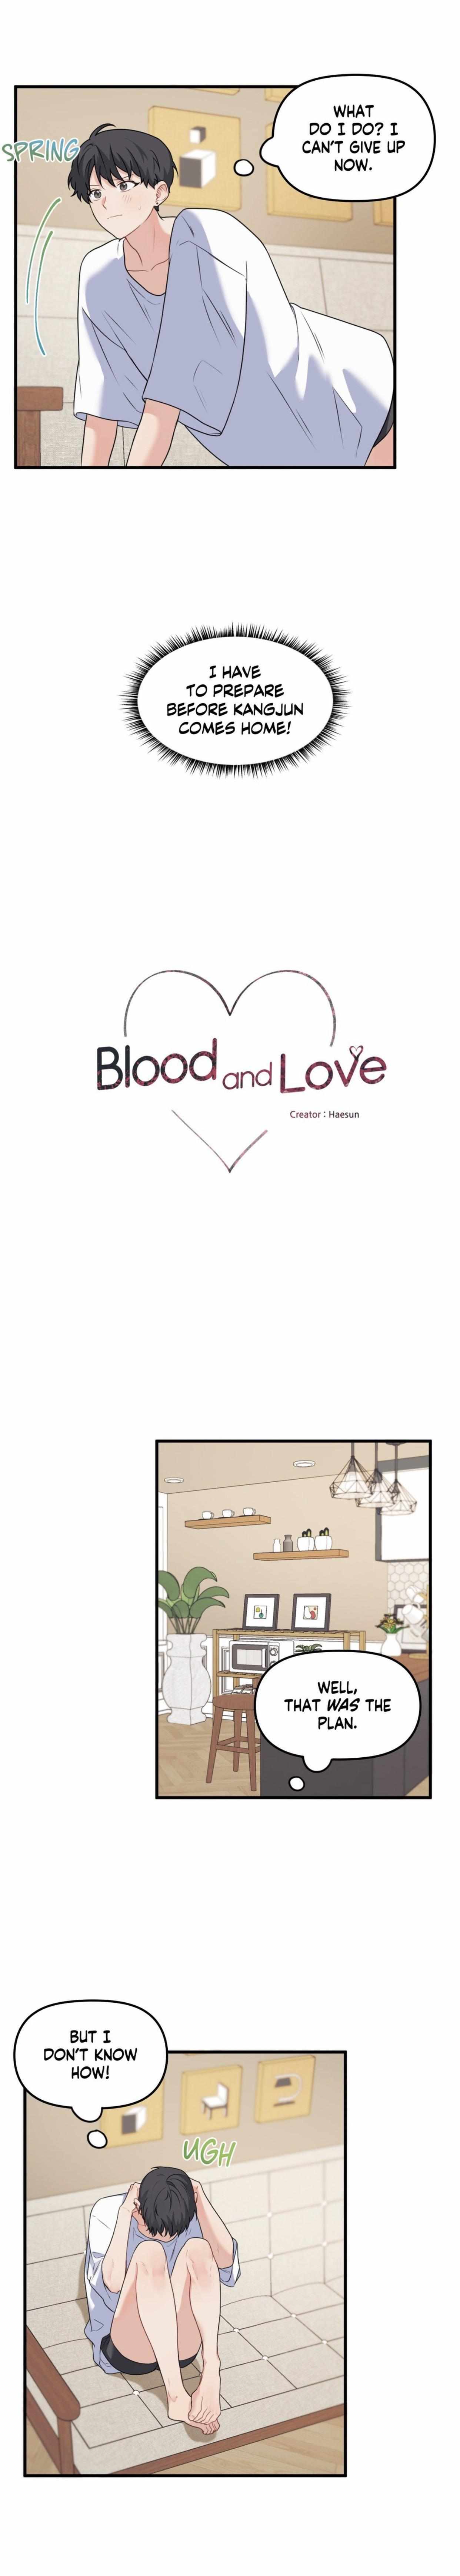 Blood And Love - Page 3